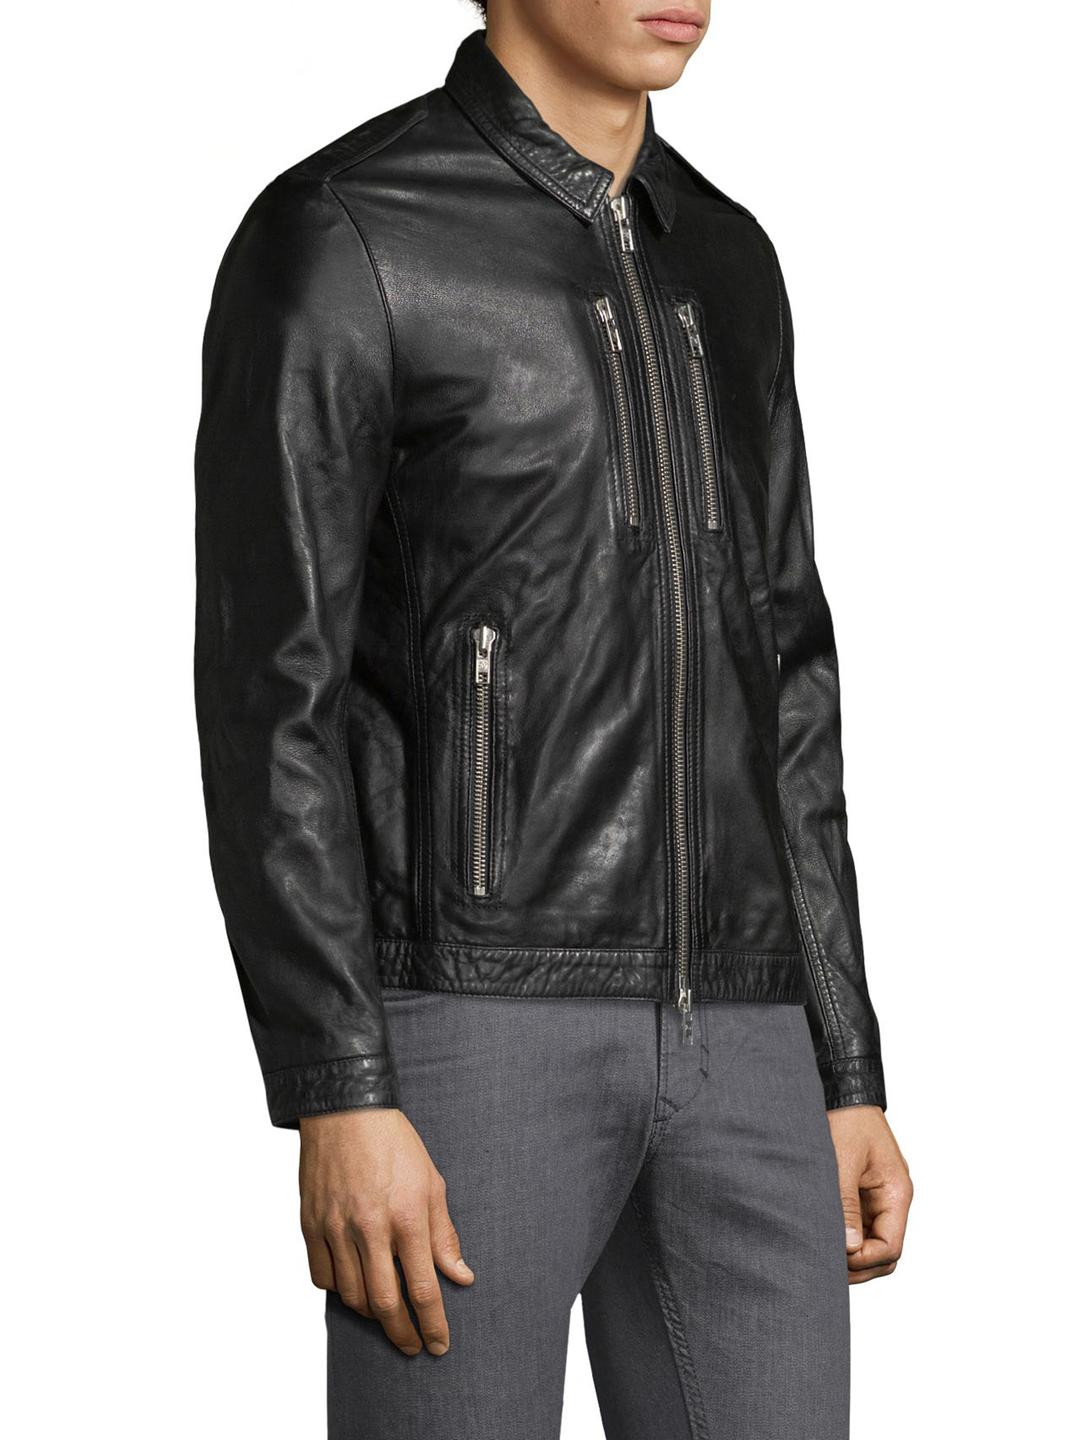 Zadig & Voltaire Lake Leather Jacket in Black for Men - Lyst